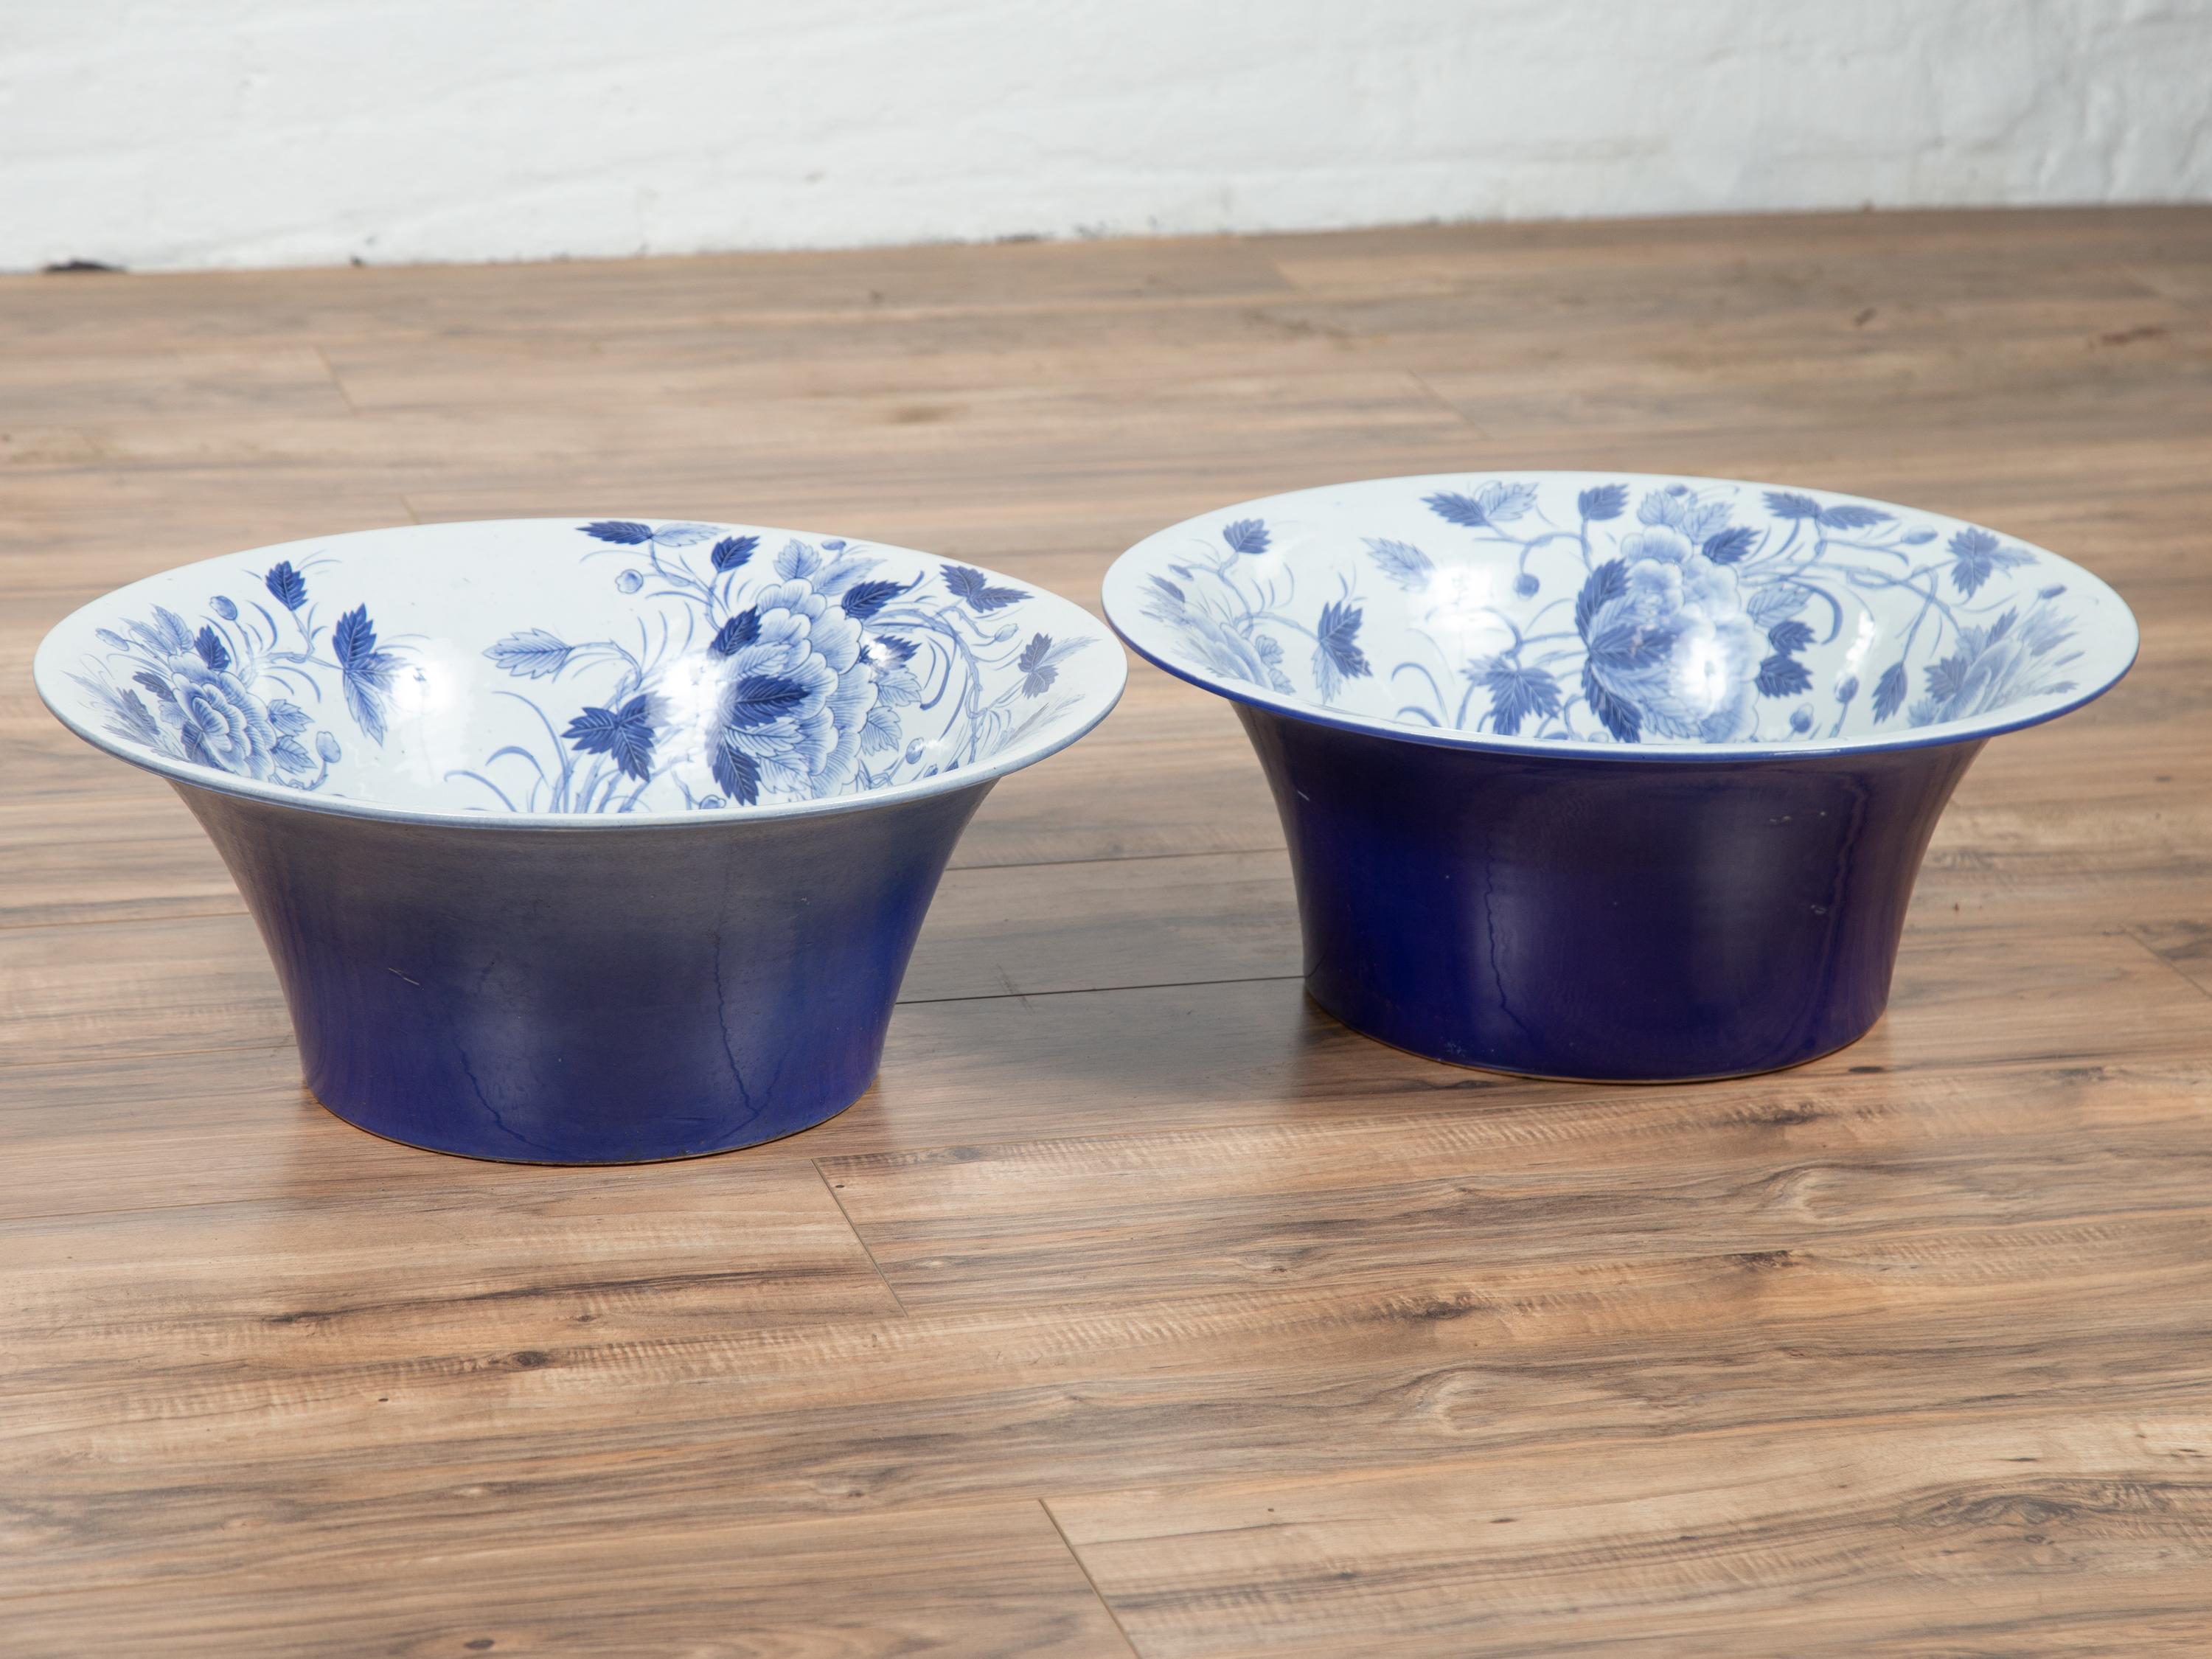 Blue and White Porcelain Wash Basin with Cobalt Blue Patina and Floral Motifs For Sale 3